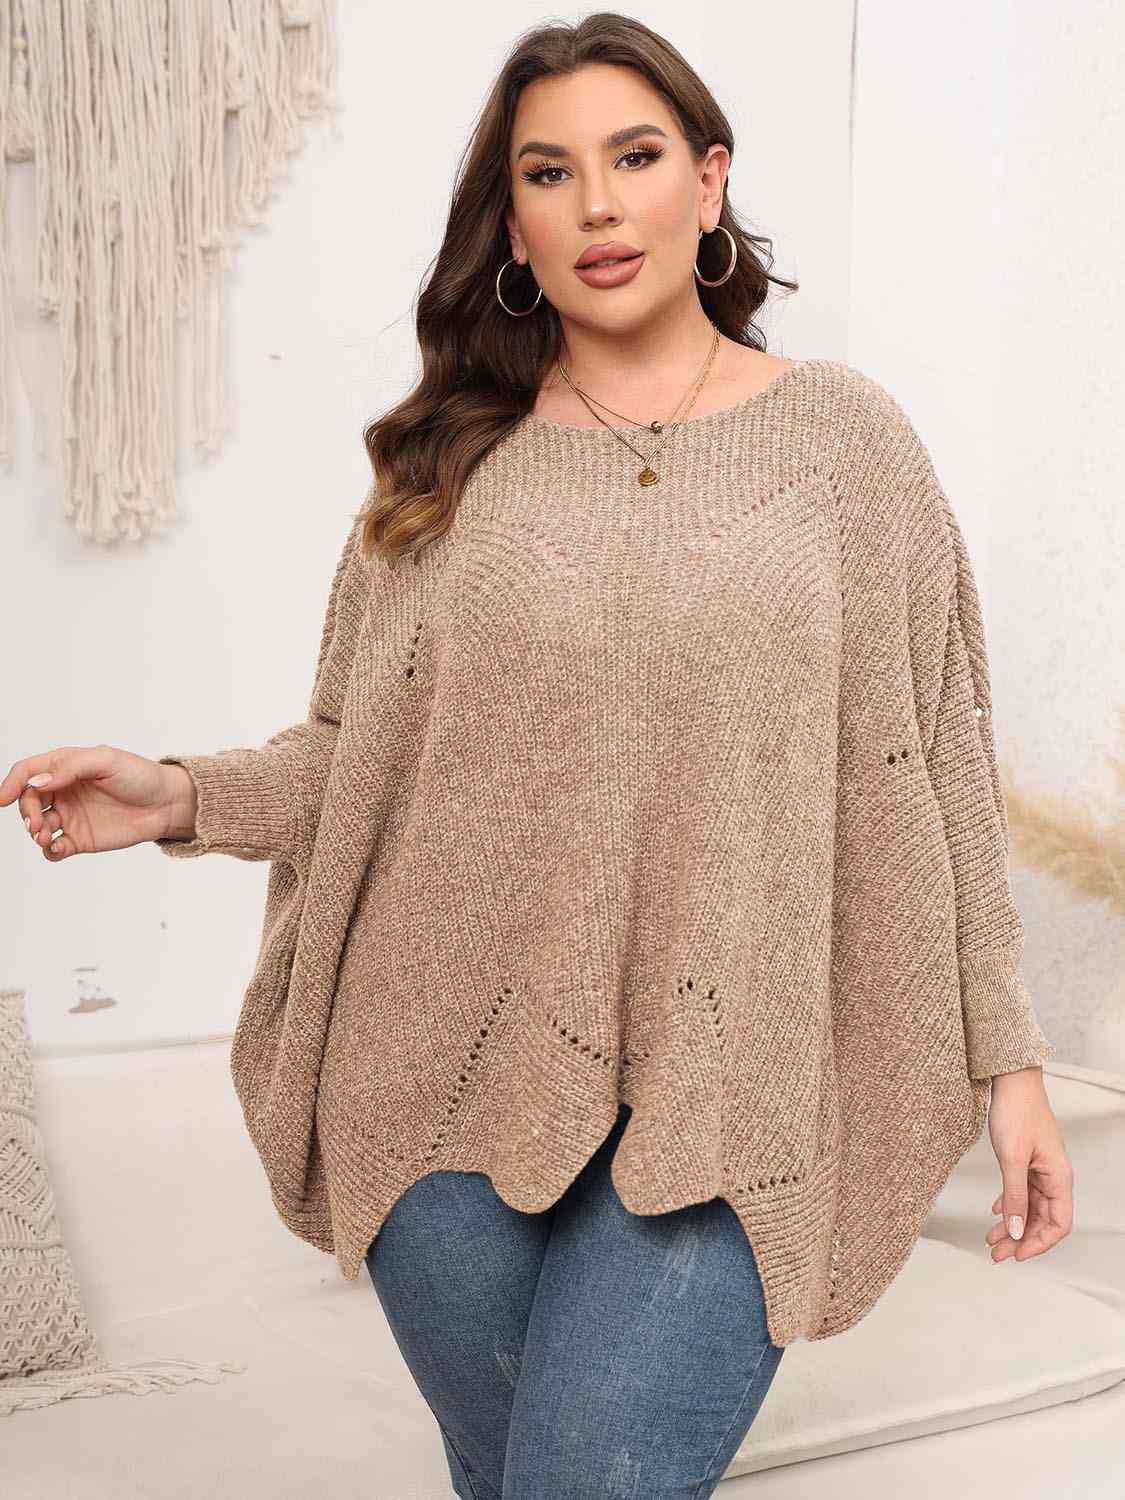 Plus Size Round Neck Batwing Sleeve Sweater BLUE ZONE PLANET